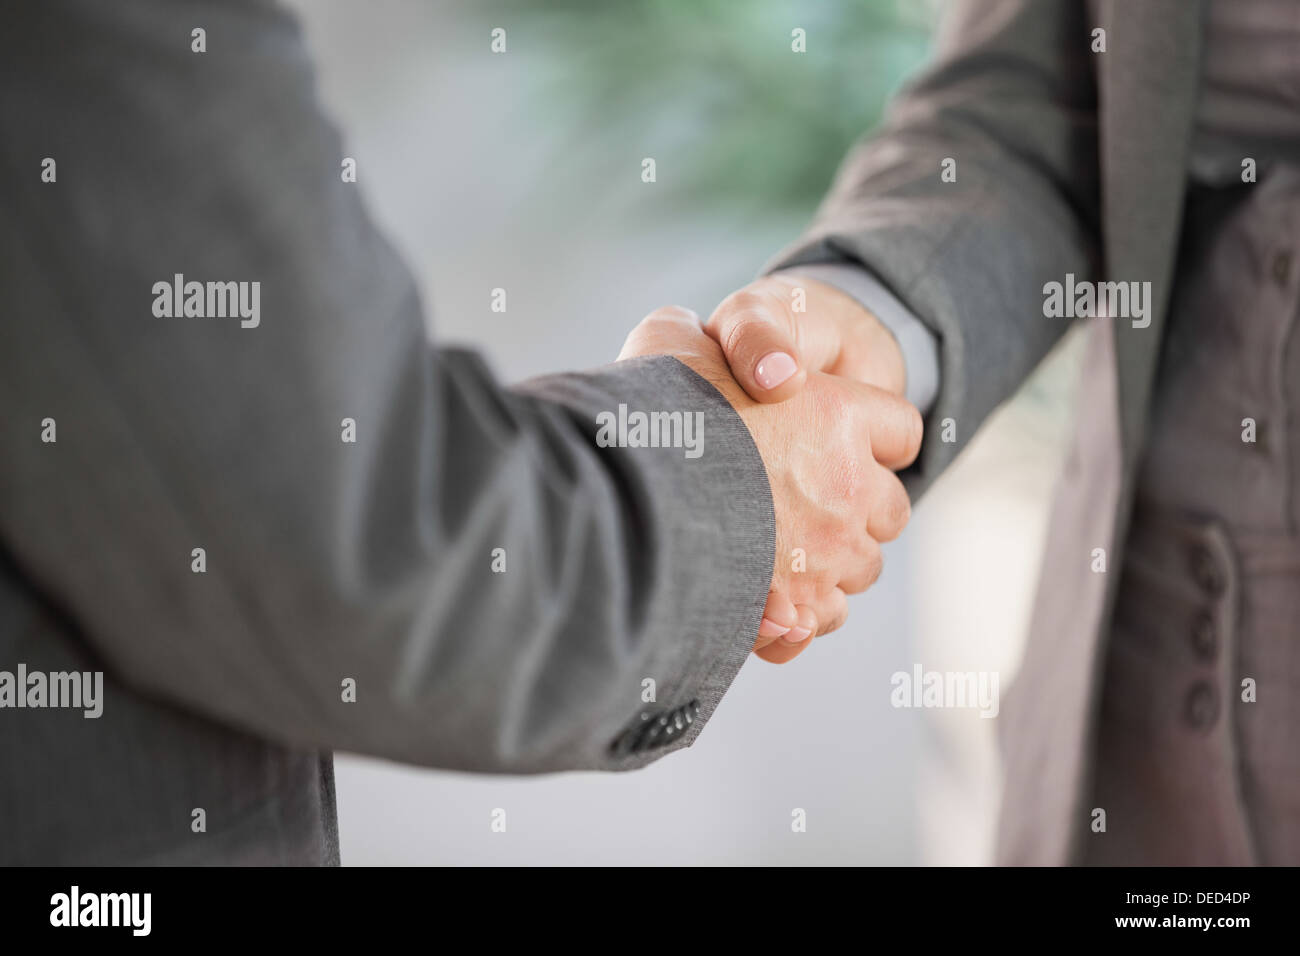 Business people shaking hands close up Stock Photo